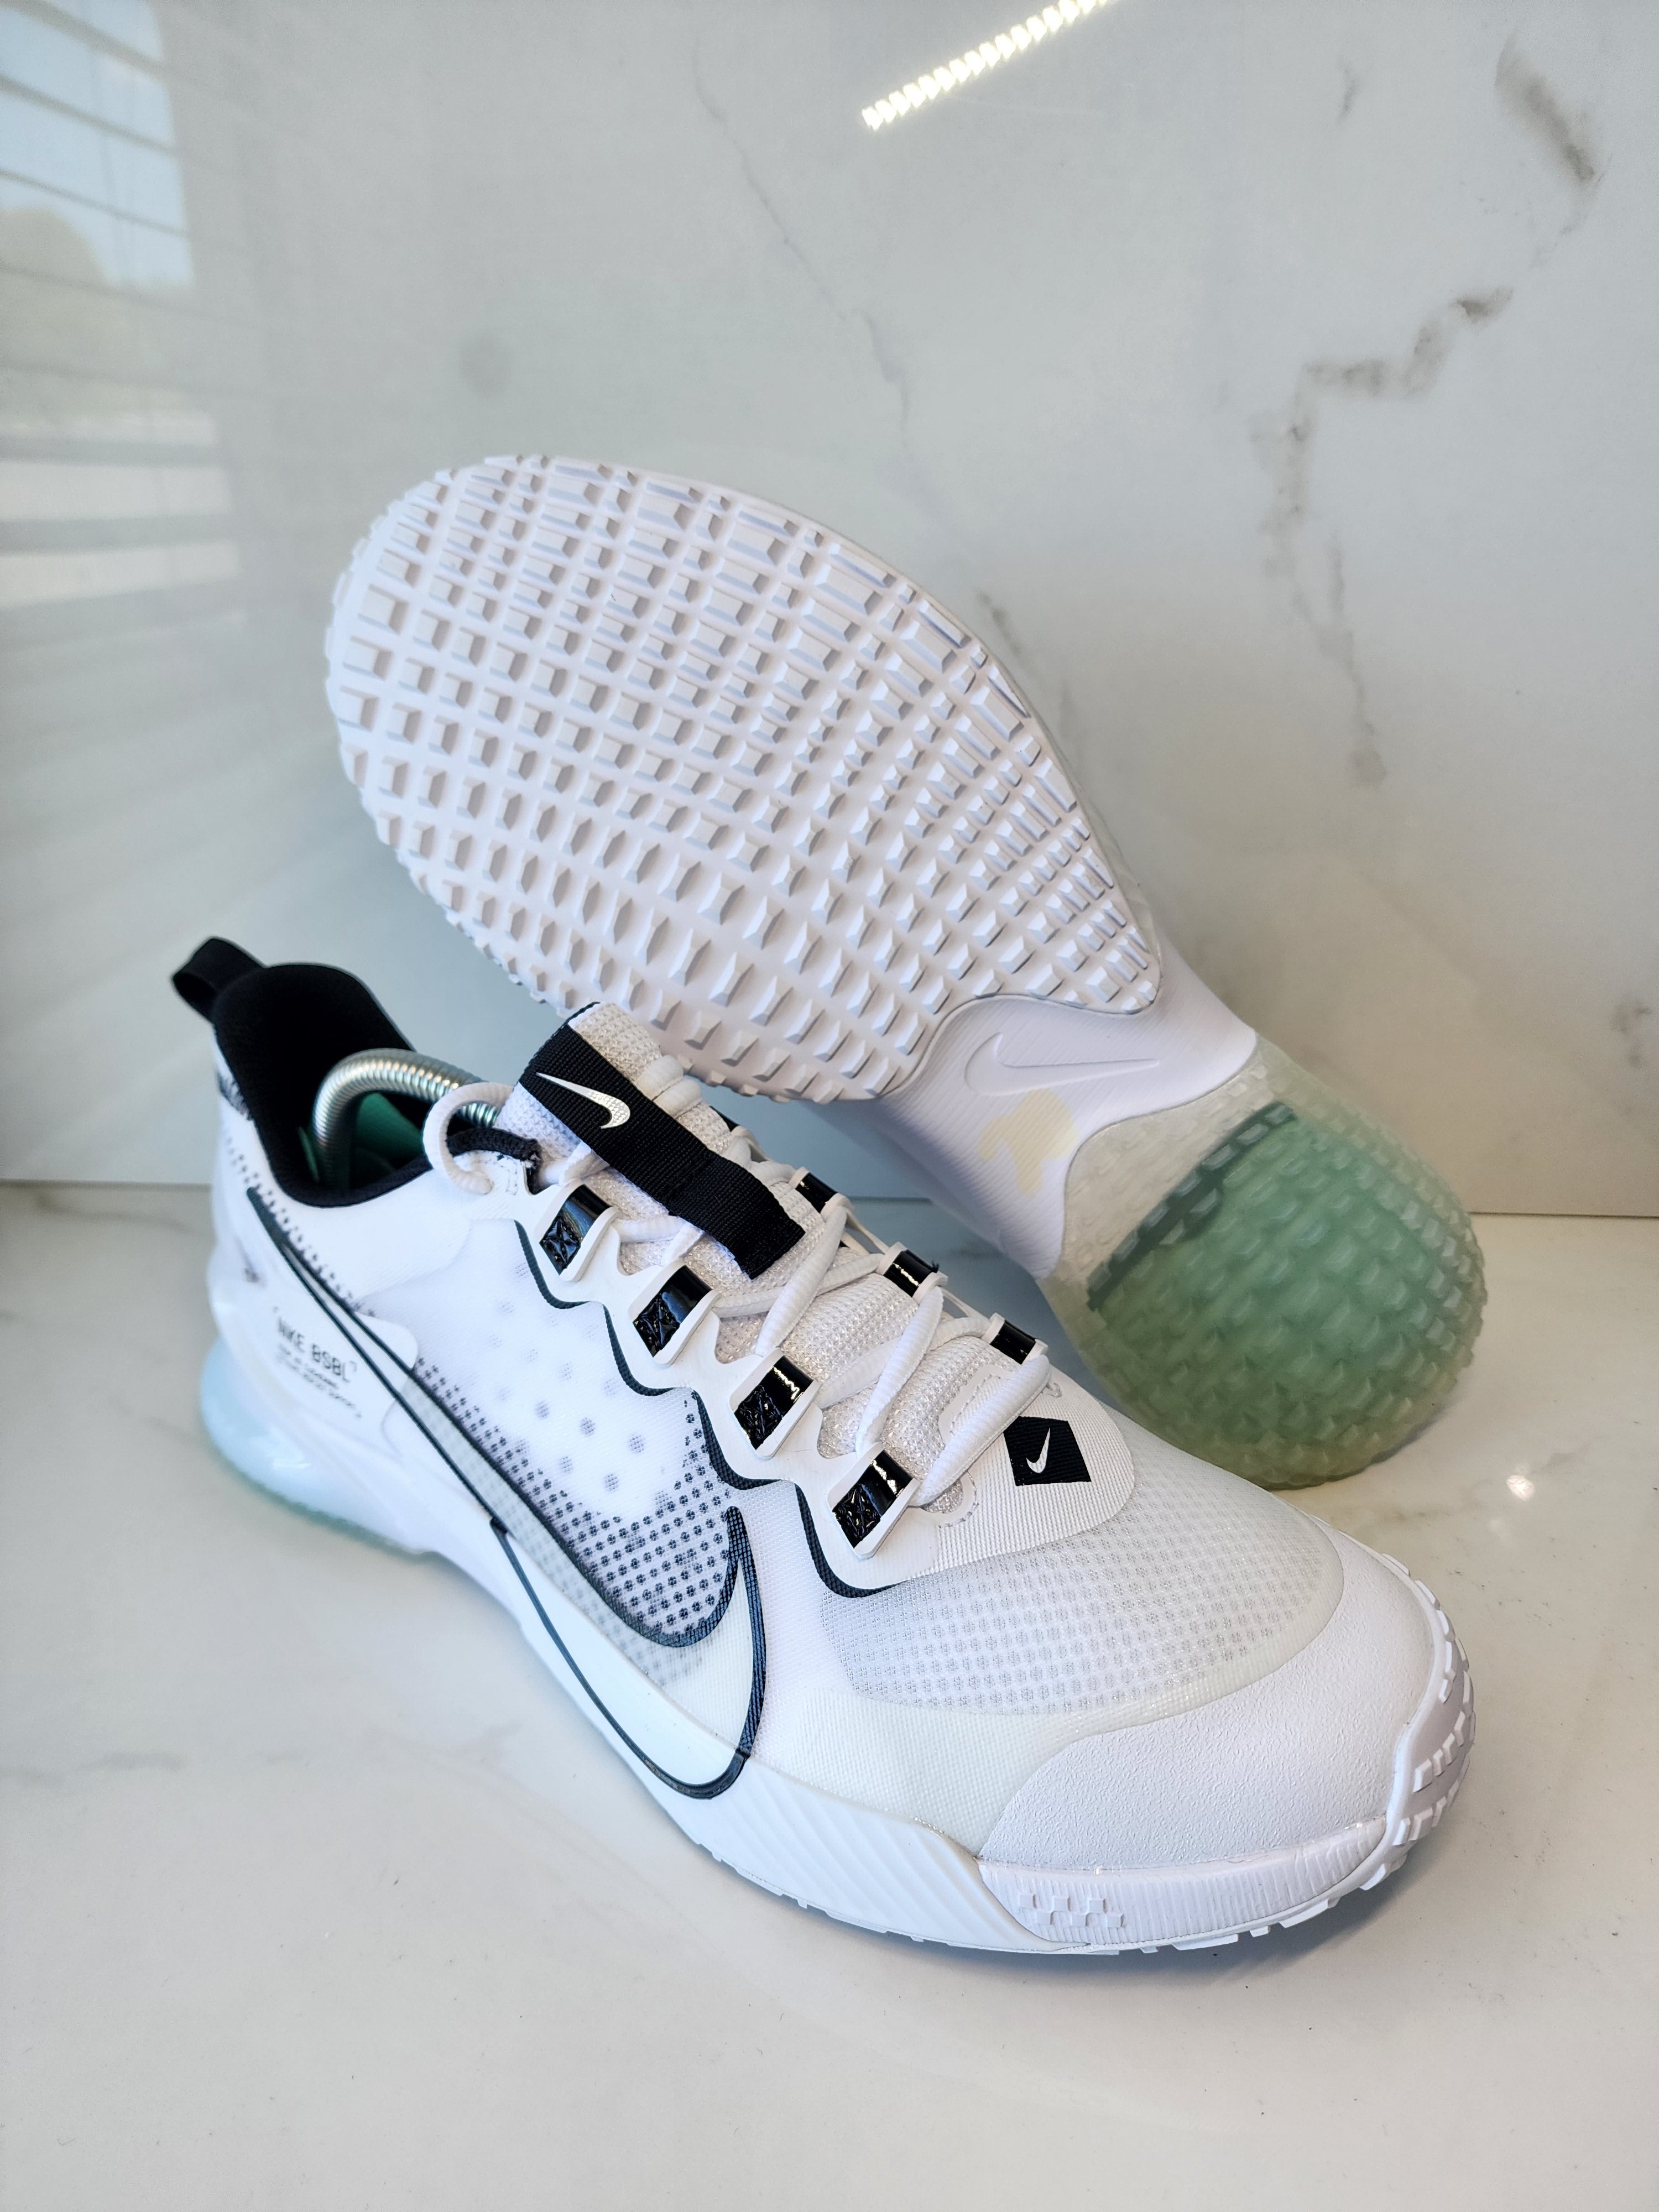 Nike Zoom Trout Turf White for Sale, Authenticity Guaranteed